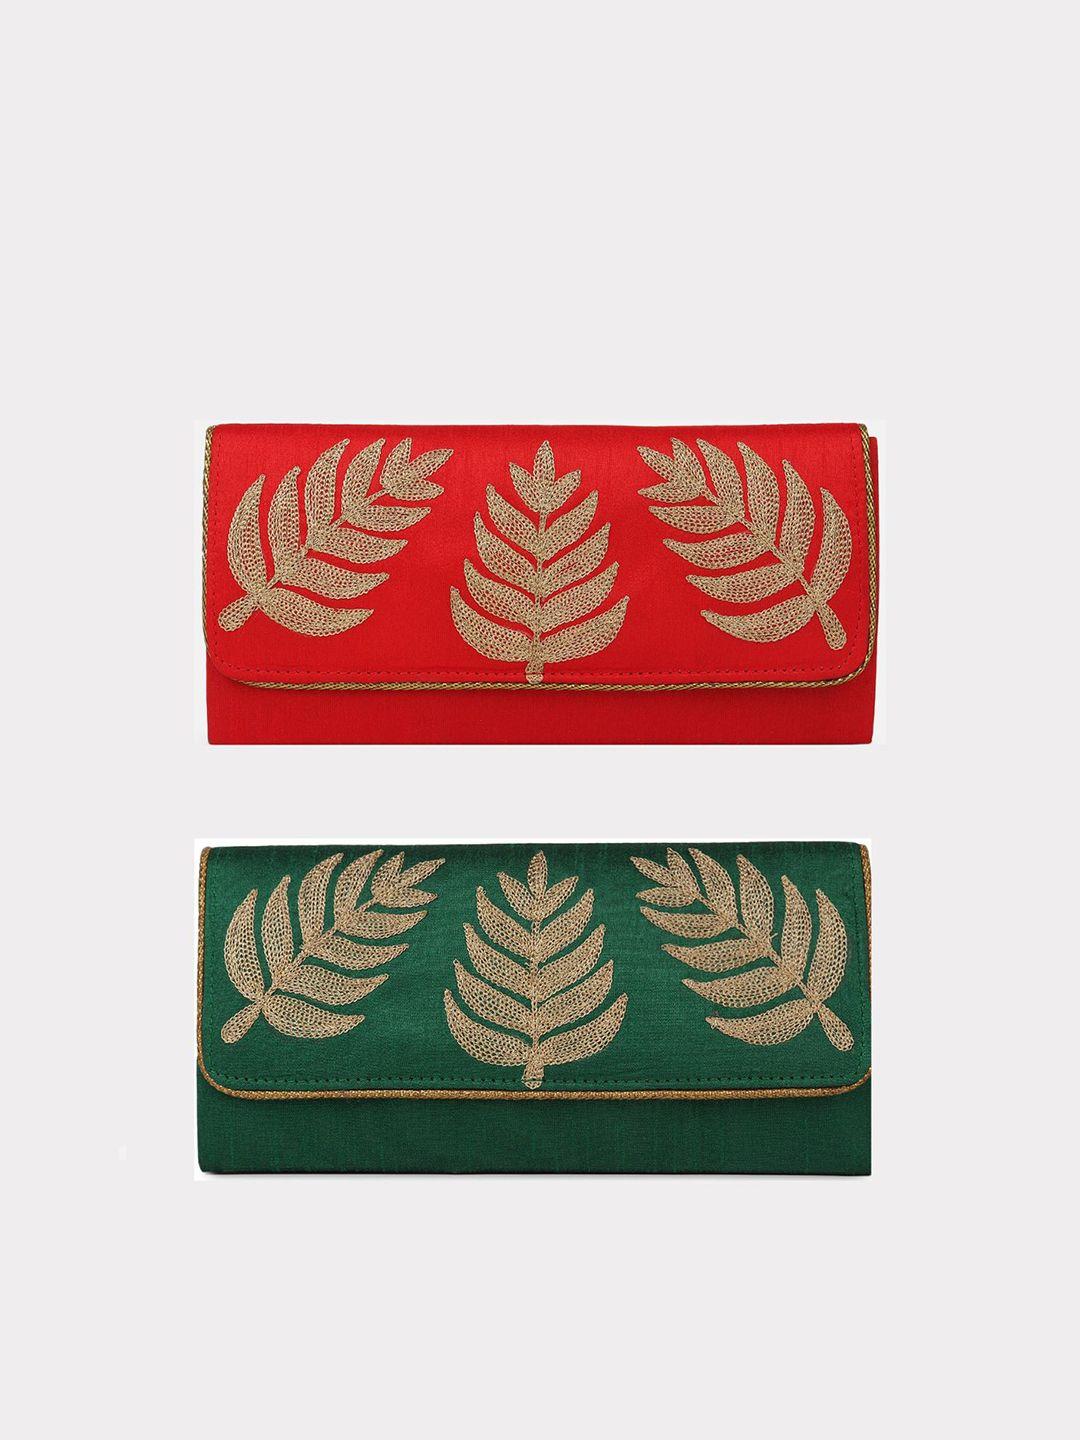 aditi wasan women set of 2 embroidered fabric envelope clutches